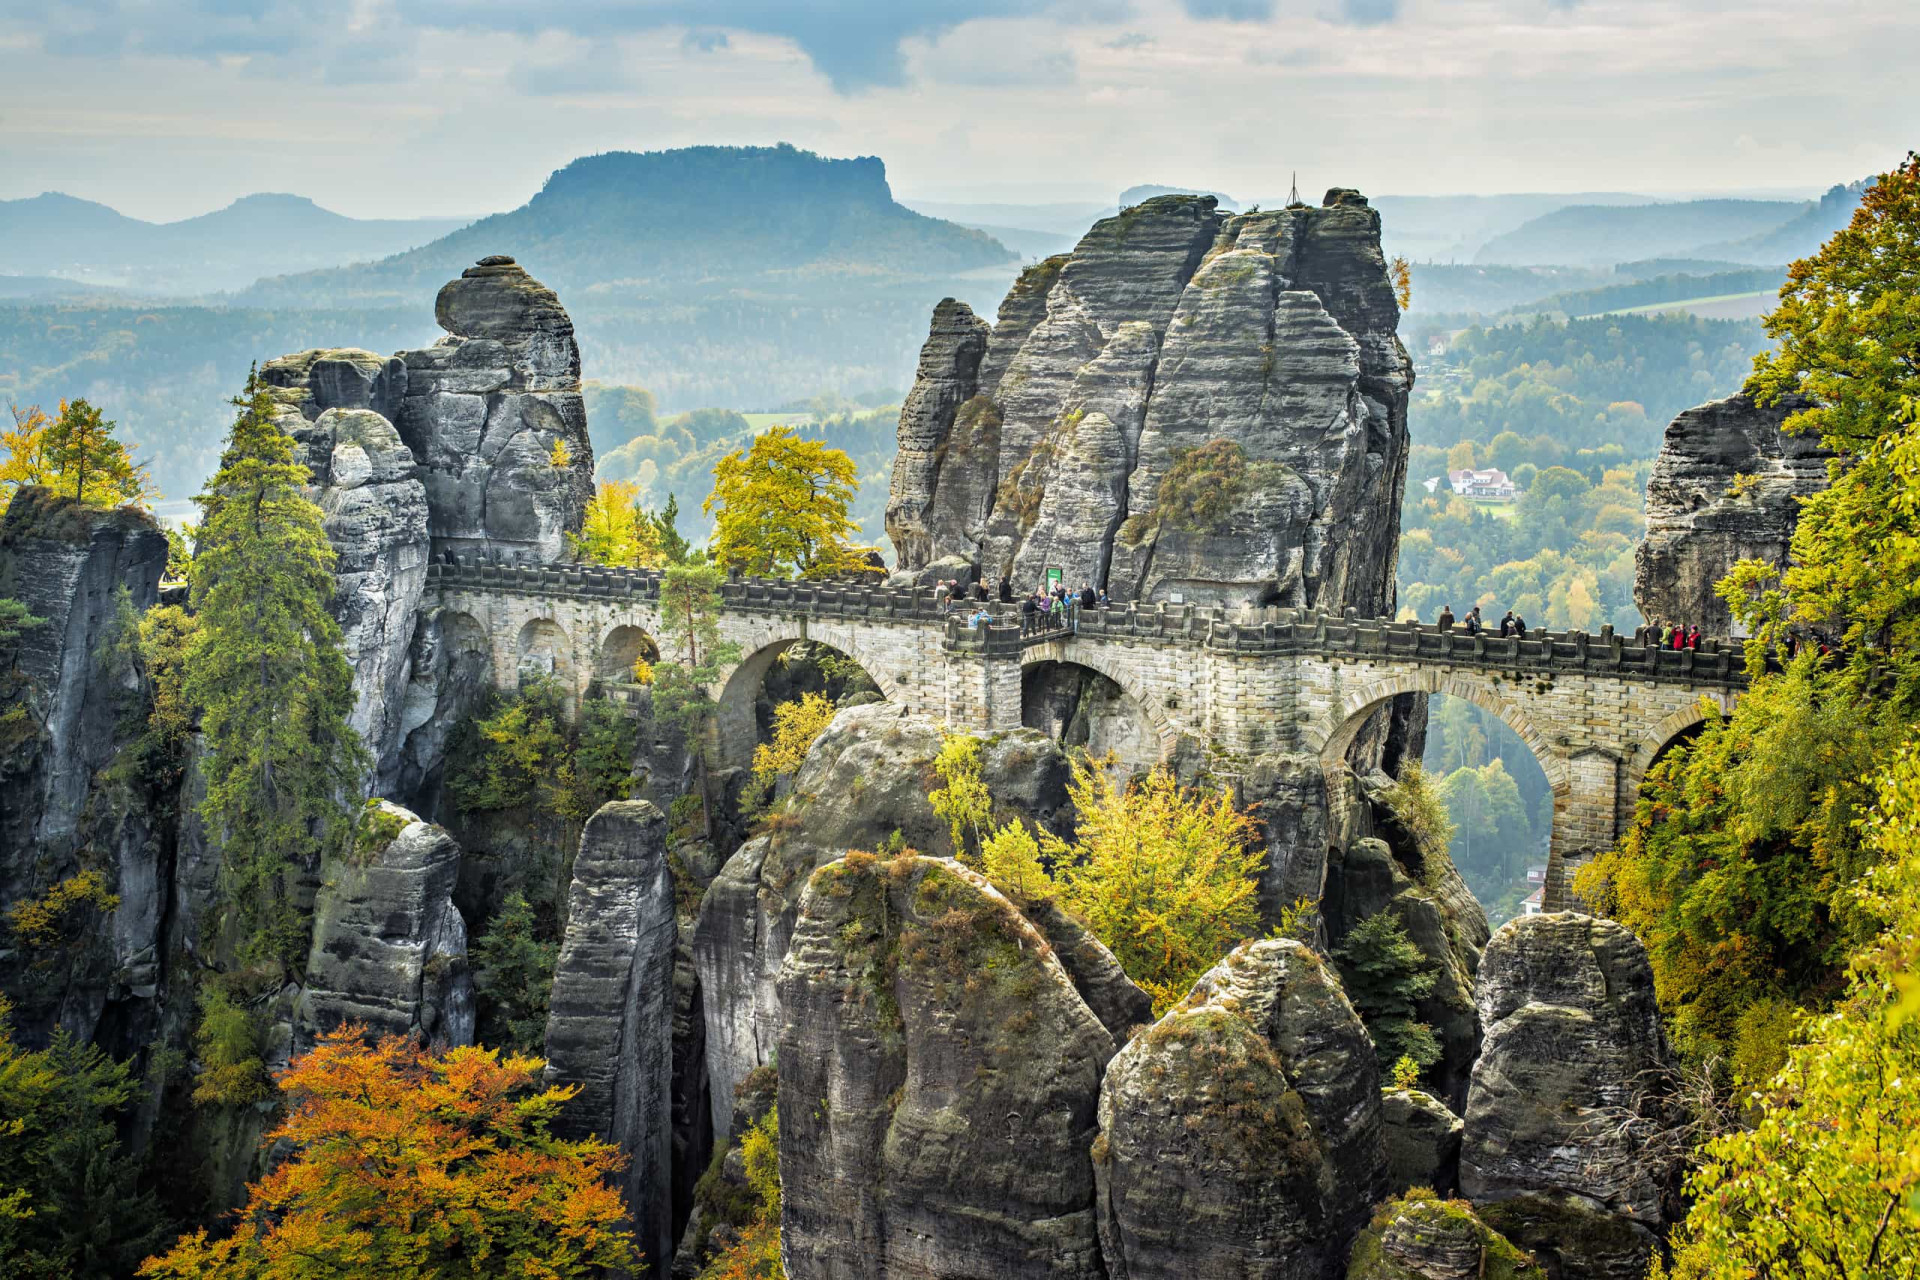 <p>Looming 194 m (636 ft) above the Elbe River in the Saxon Switzerland National Park, the remarkable Bastei <a href="https://www.starsinsider.com/travel/206237/the-worlds-most-remarkable-bridges" rel="noopener">Bridge</a> is one of the region's most famous landmarks, and certainly the most scenic.</p><p>You may also like:<a href="https://www.starsinsider.com/n/246349?utm_source=msn.com&utm_medium=display&utm_campaign=referral_description&utm_content=481885v1en-us"> The alcoholic beverage of choice in all 50 states</a></p>